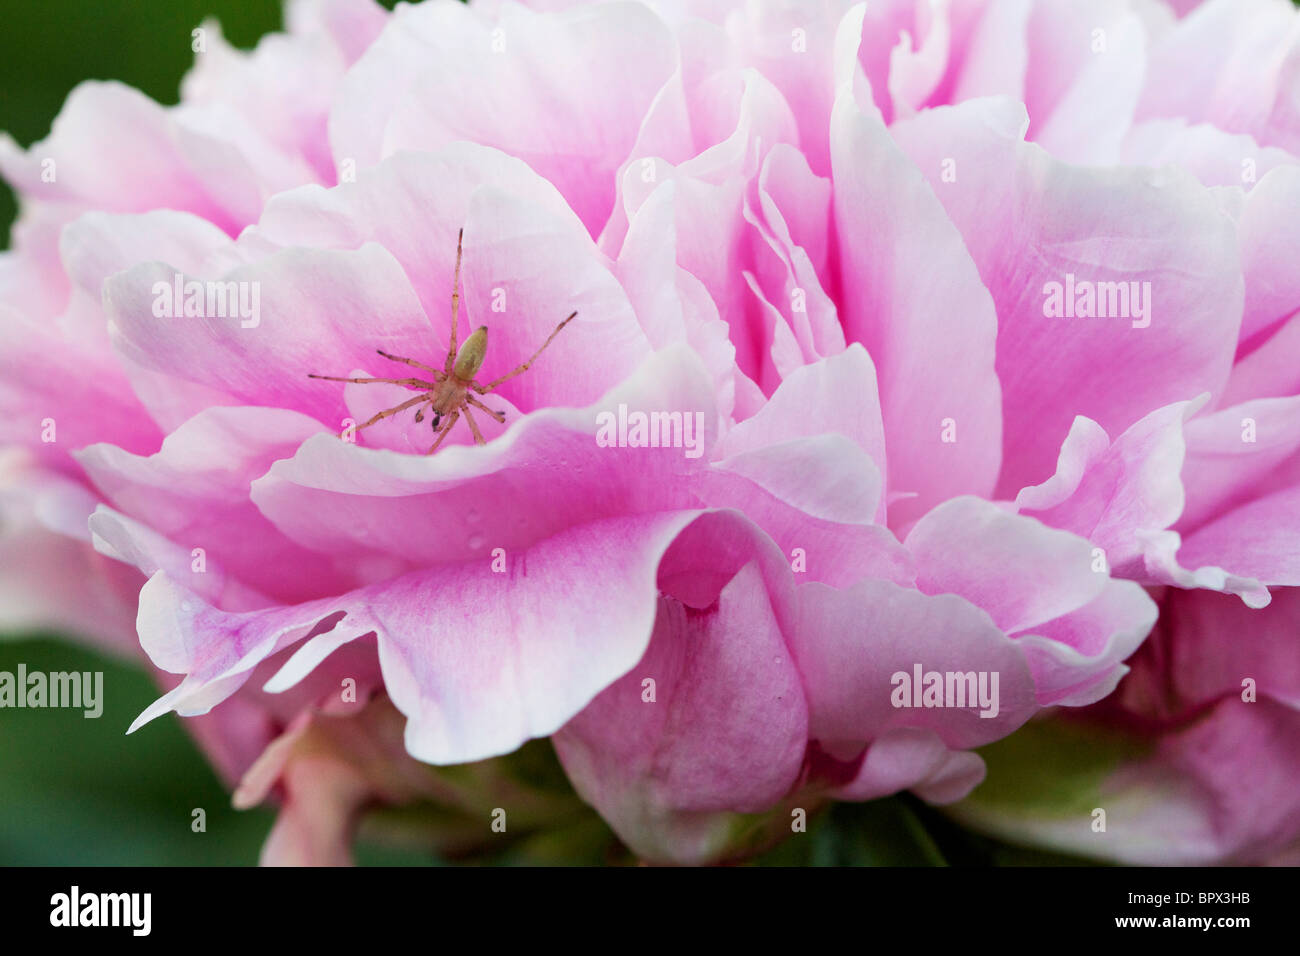 Pink peony flower with spider. Stock Photo